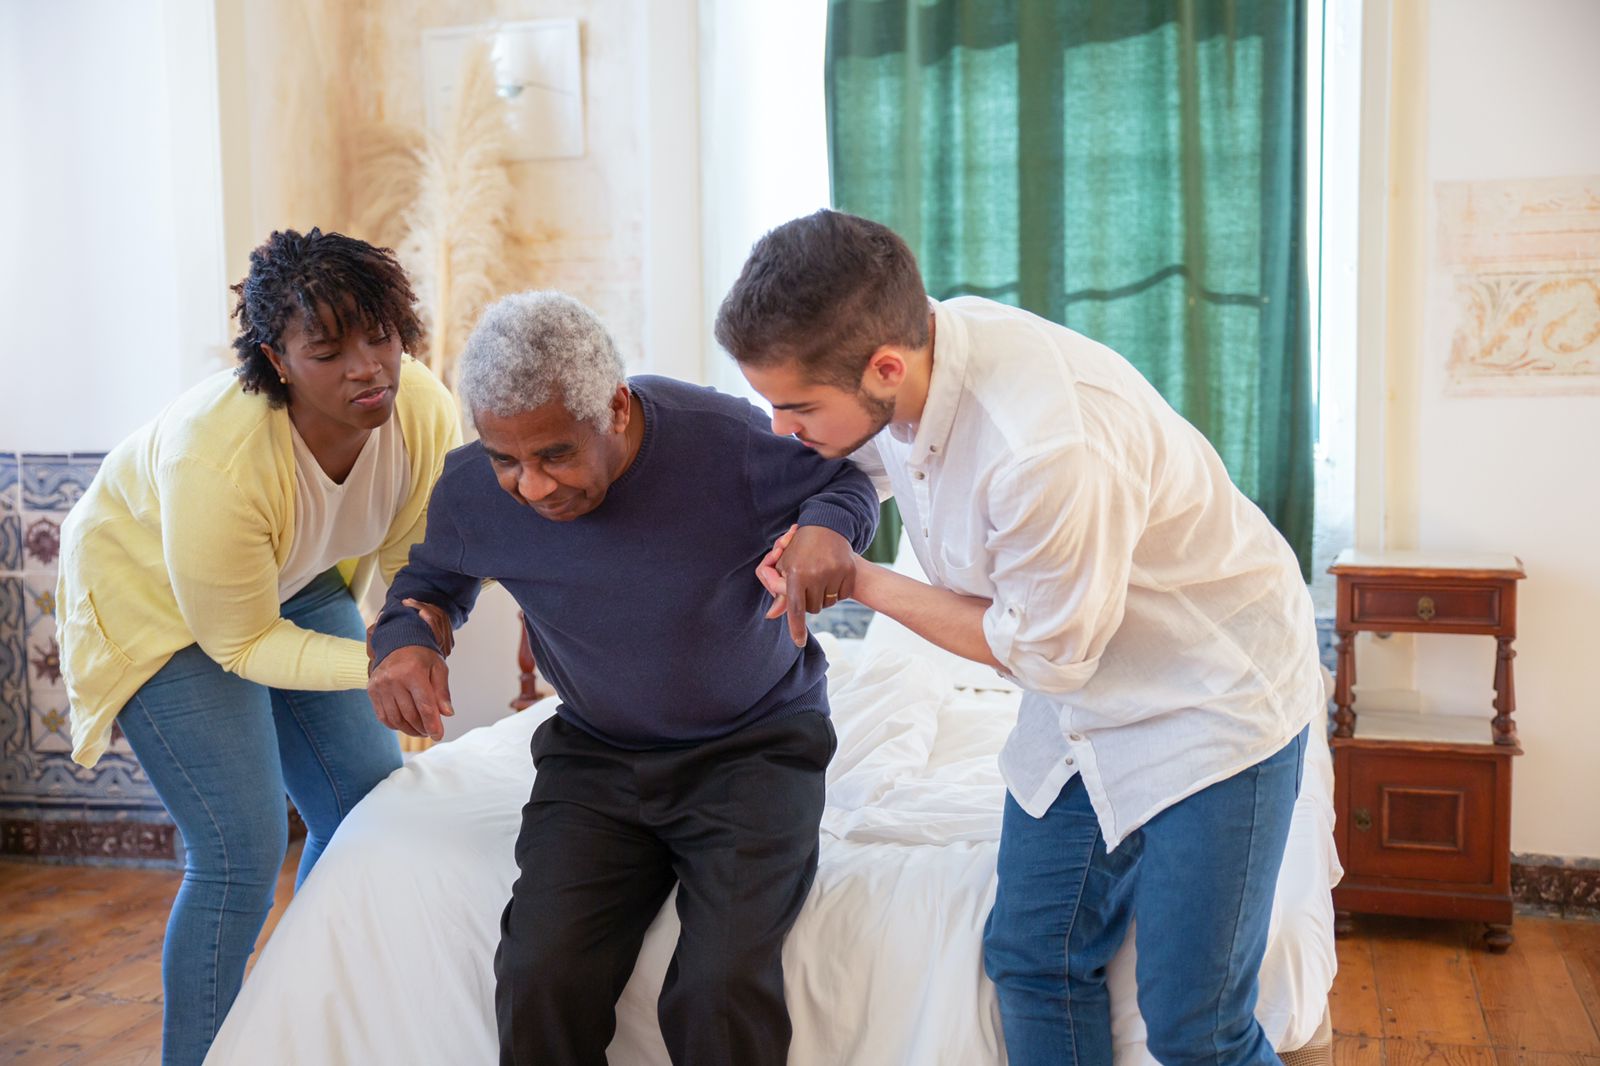 A male and female caregiver helping support an elderly man out of bed